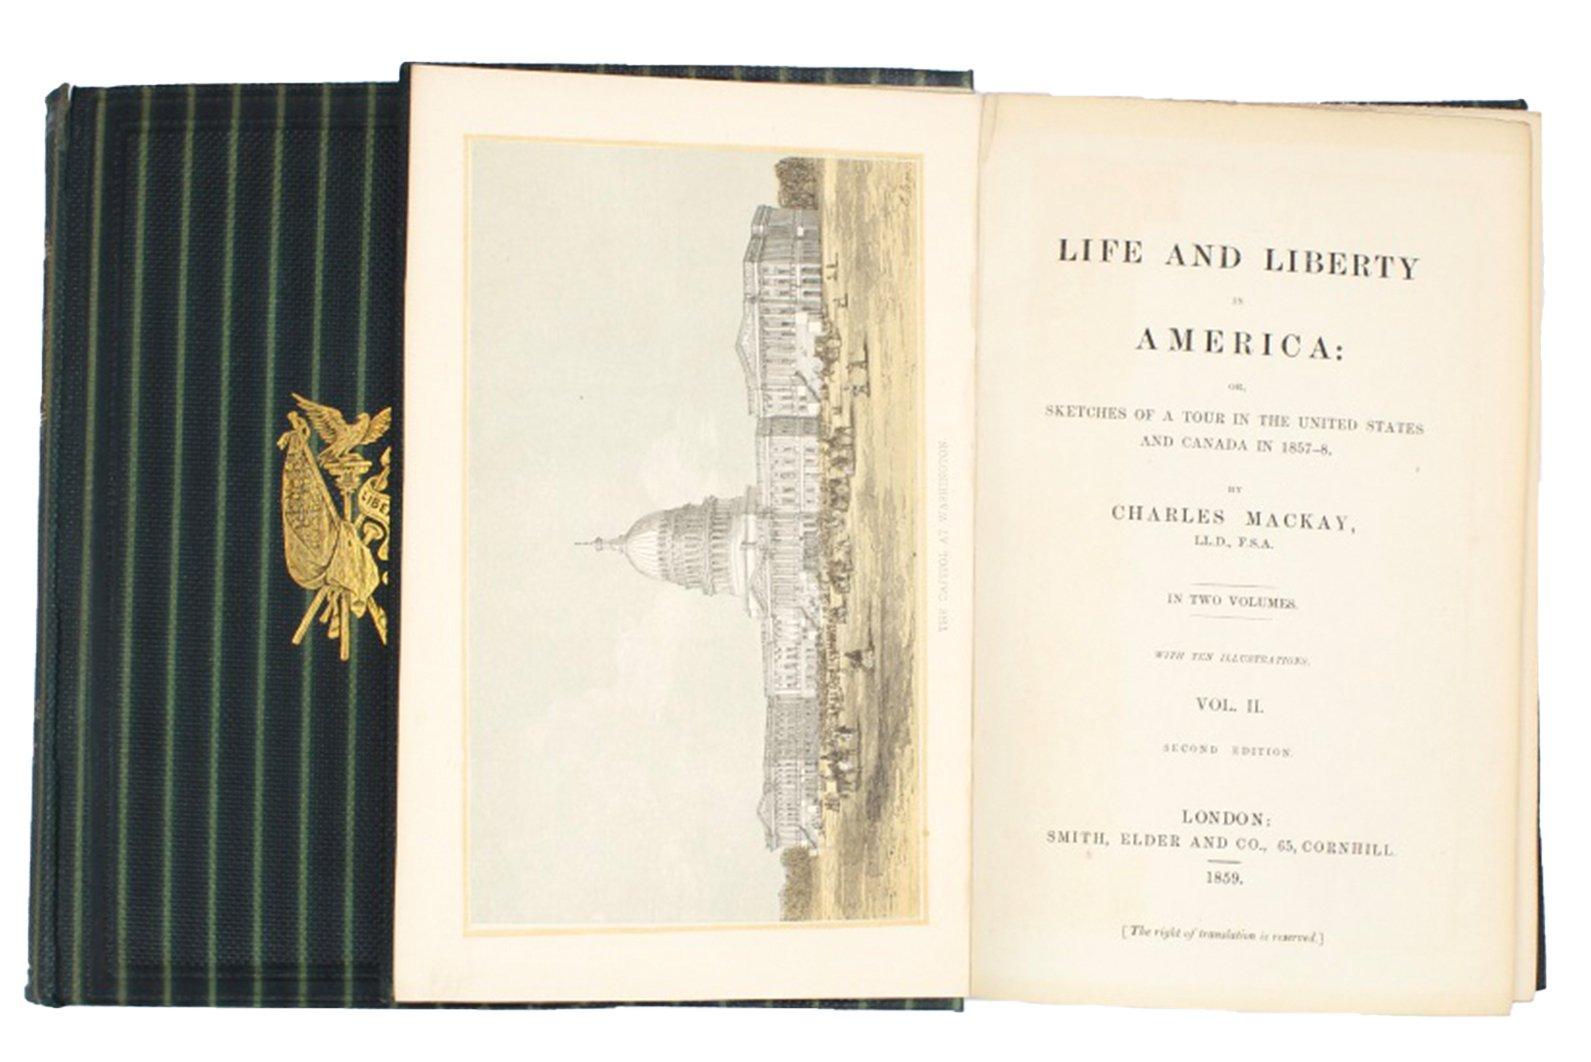 Mackay, Charles. Life and Liberty in America: or, Sketches of a Tour in the United States and Canada, in 1857-1858. London: Smith Elder & Co., 1859. Second edition printing. Two volumes, octavo printings. In the publisher's original dark green